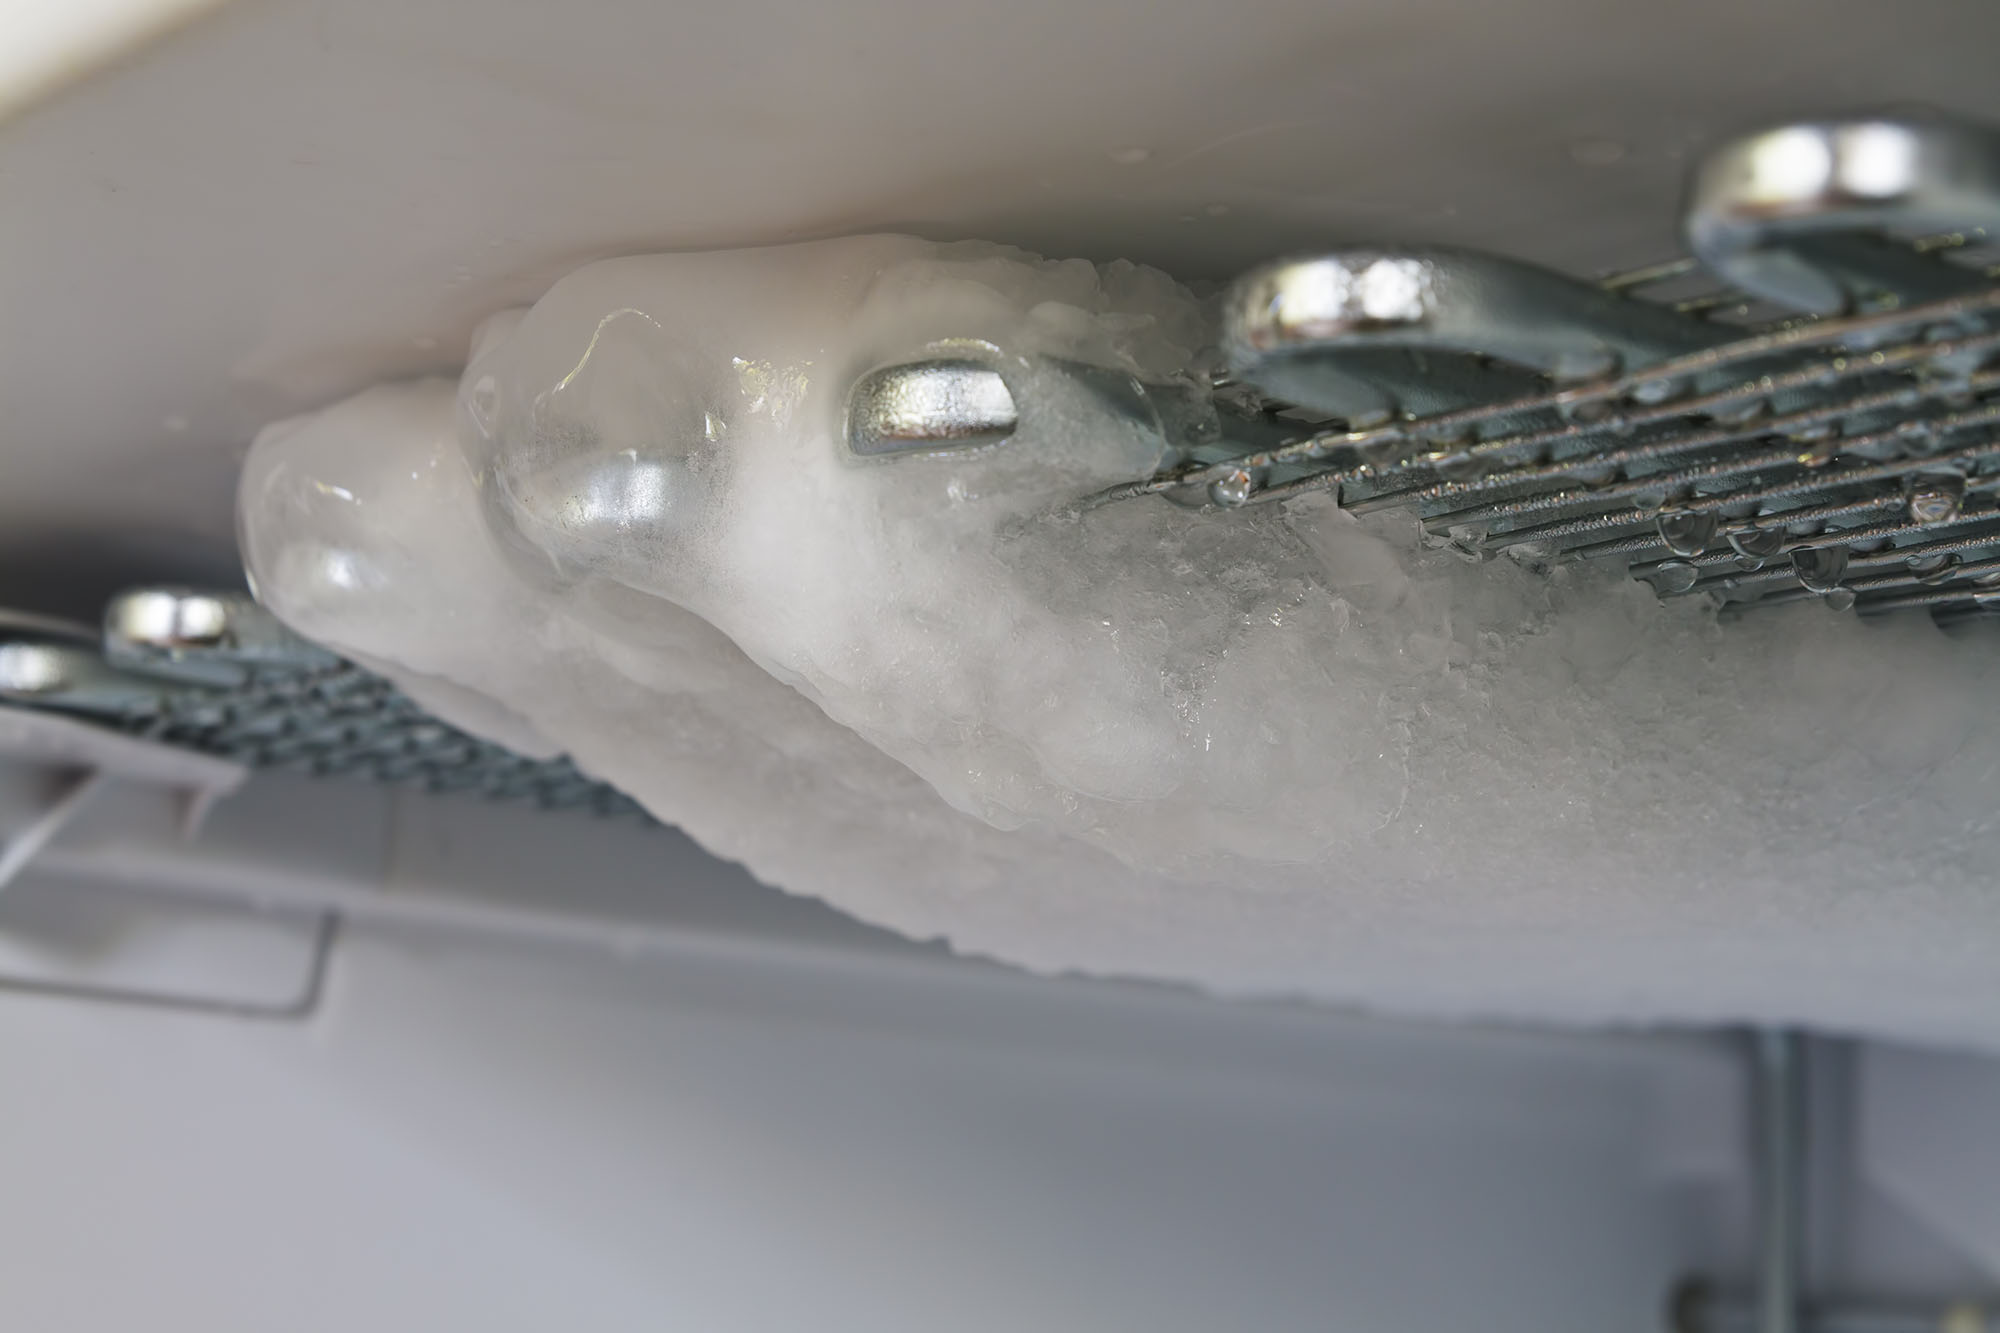 Evaporator coils frozen over with ice and defrosting